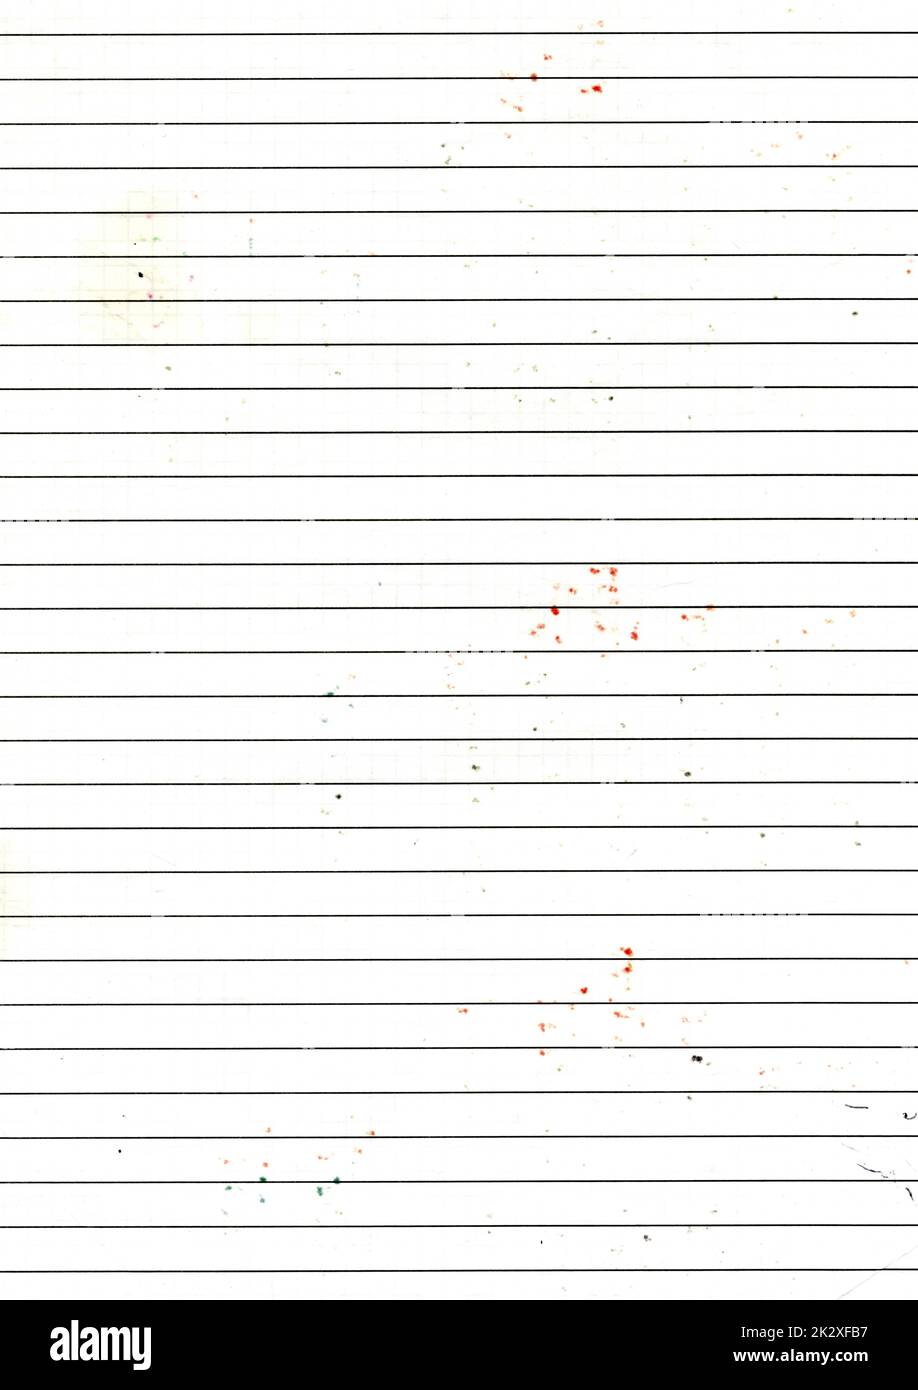 High resolution large image of used, worn out line graph paper texture background scan with color stain spots from writing with markers, weathered old school paper wallpaper with copy space for text Stock Photo